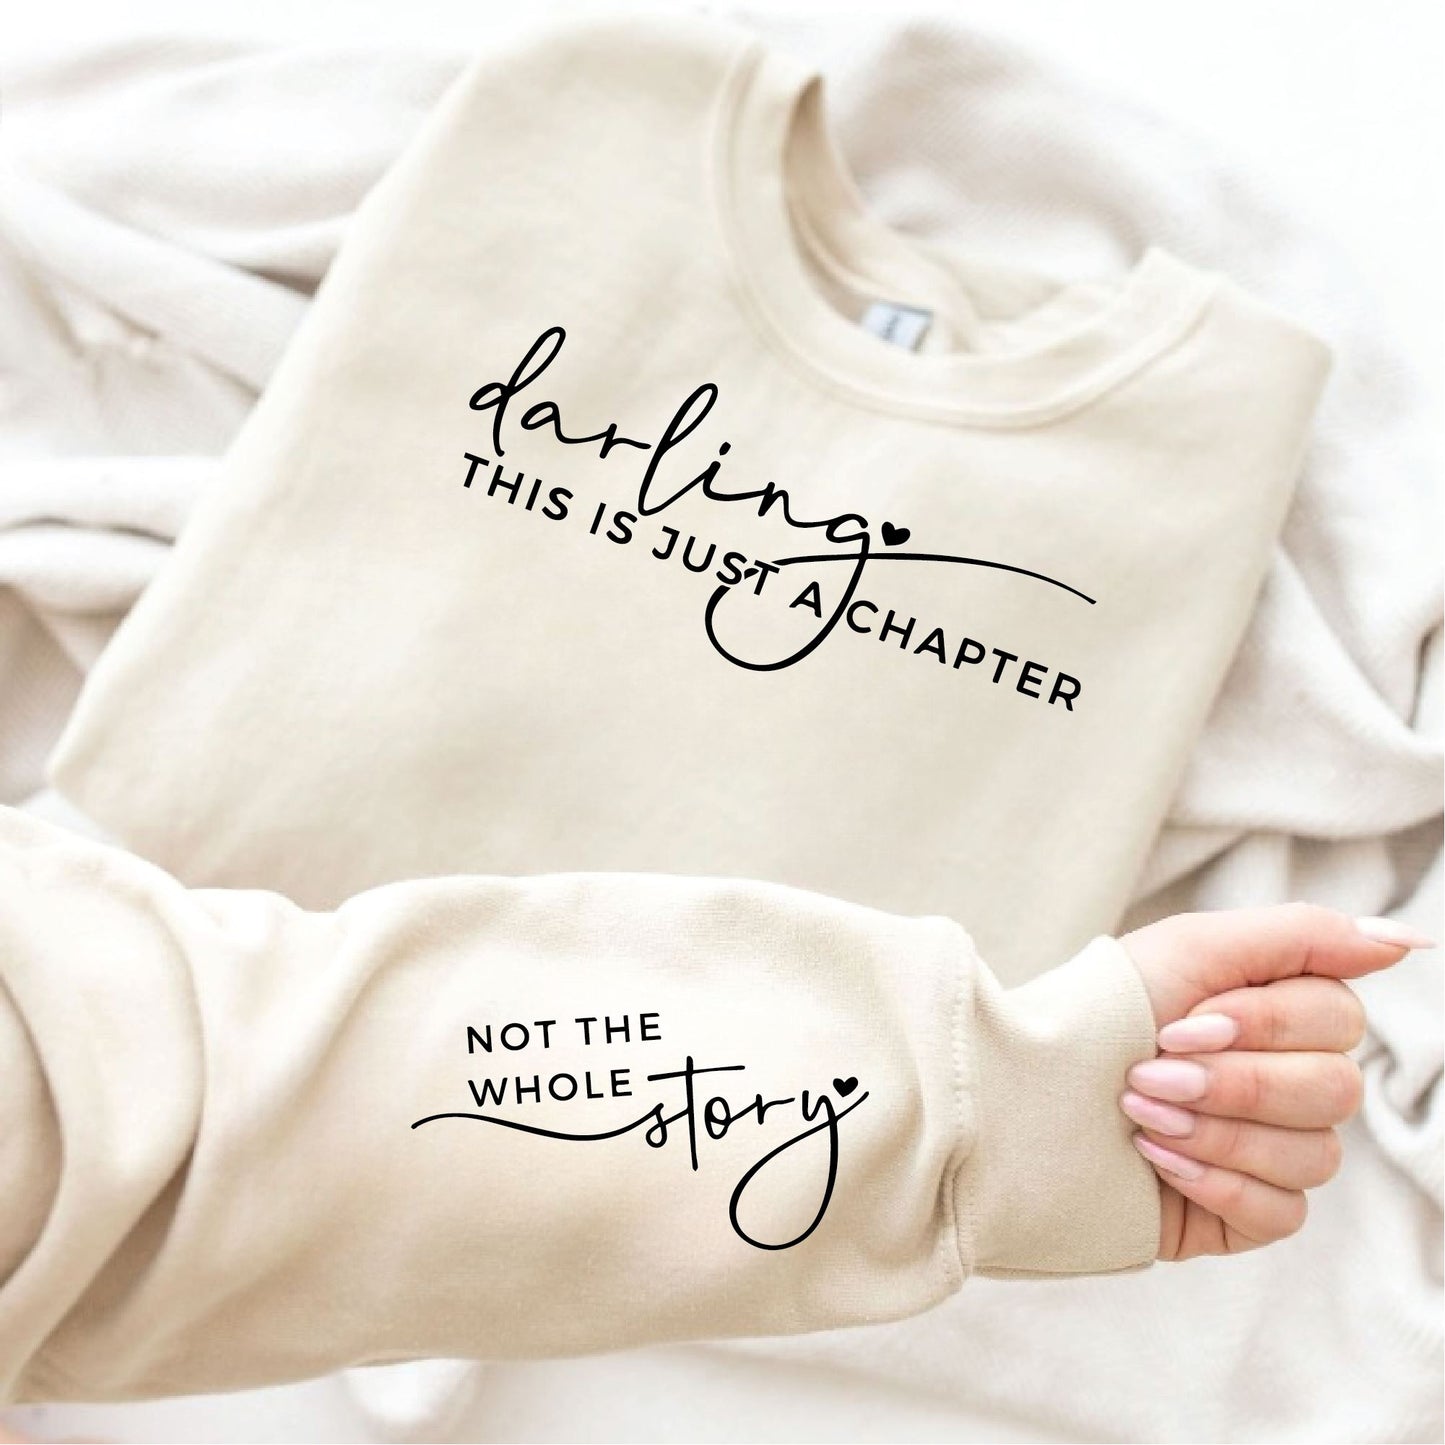 Darling this is just a chapter sweatshirt